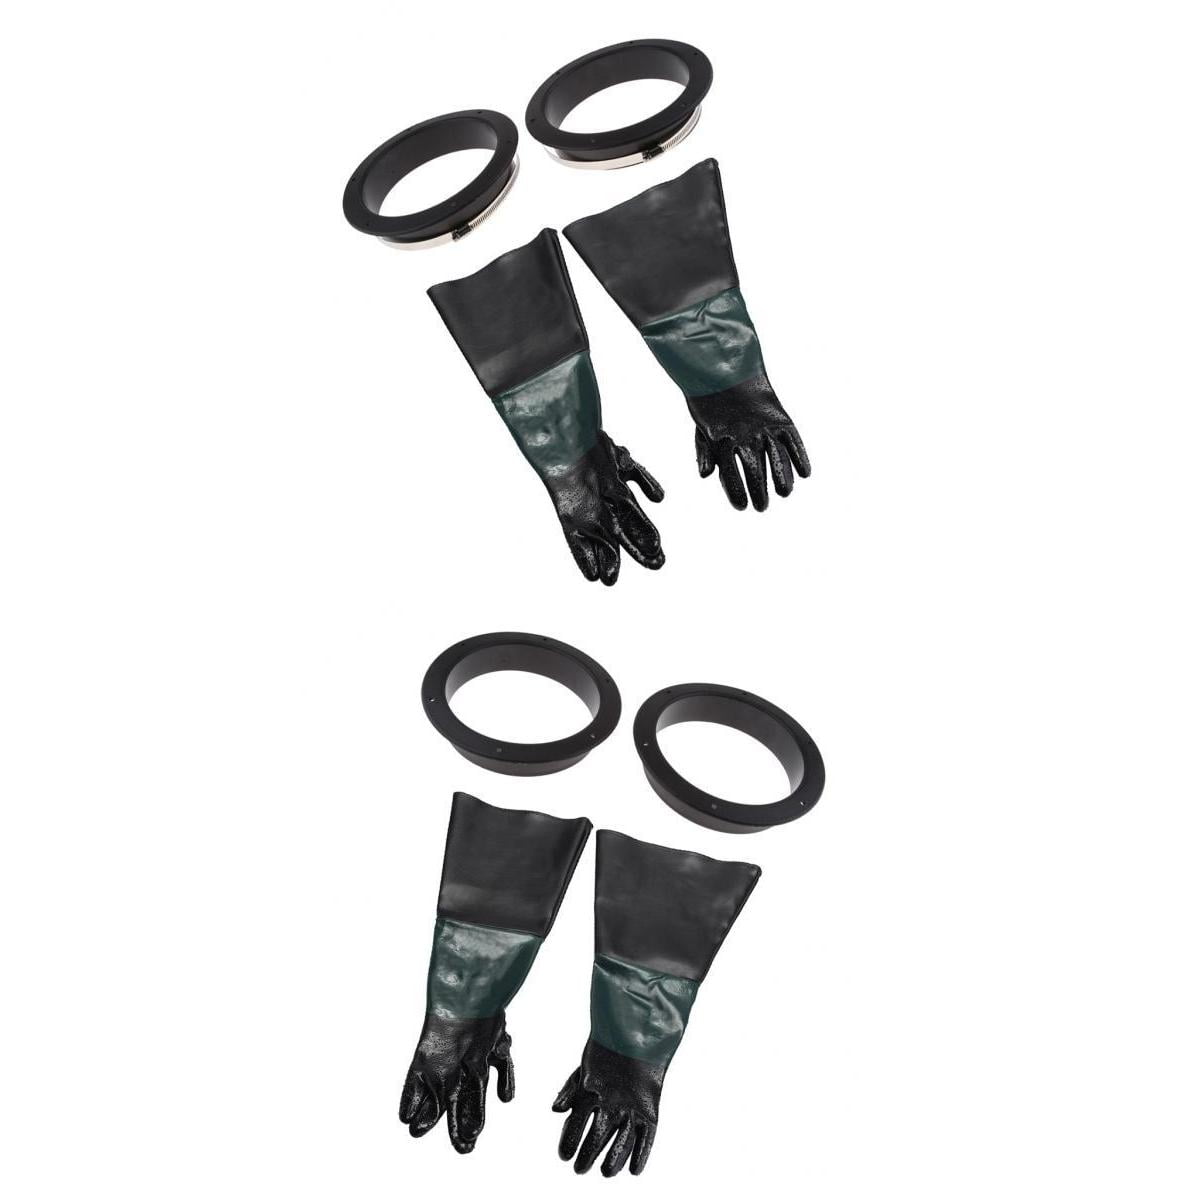 Details about   2 Pair Industrial Tools Rubber Sandblasting Gloves for Sandblast Cabinets 